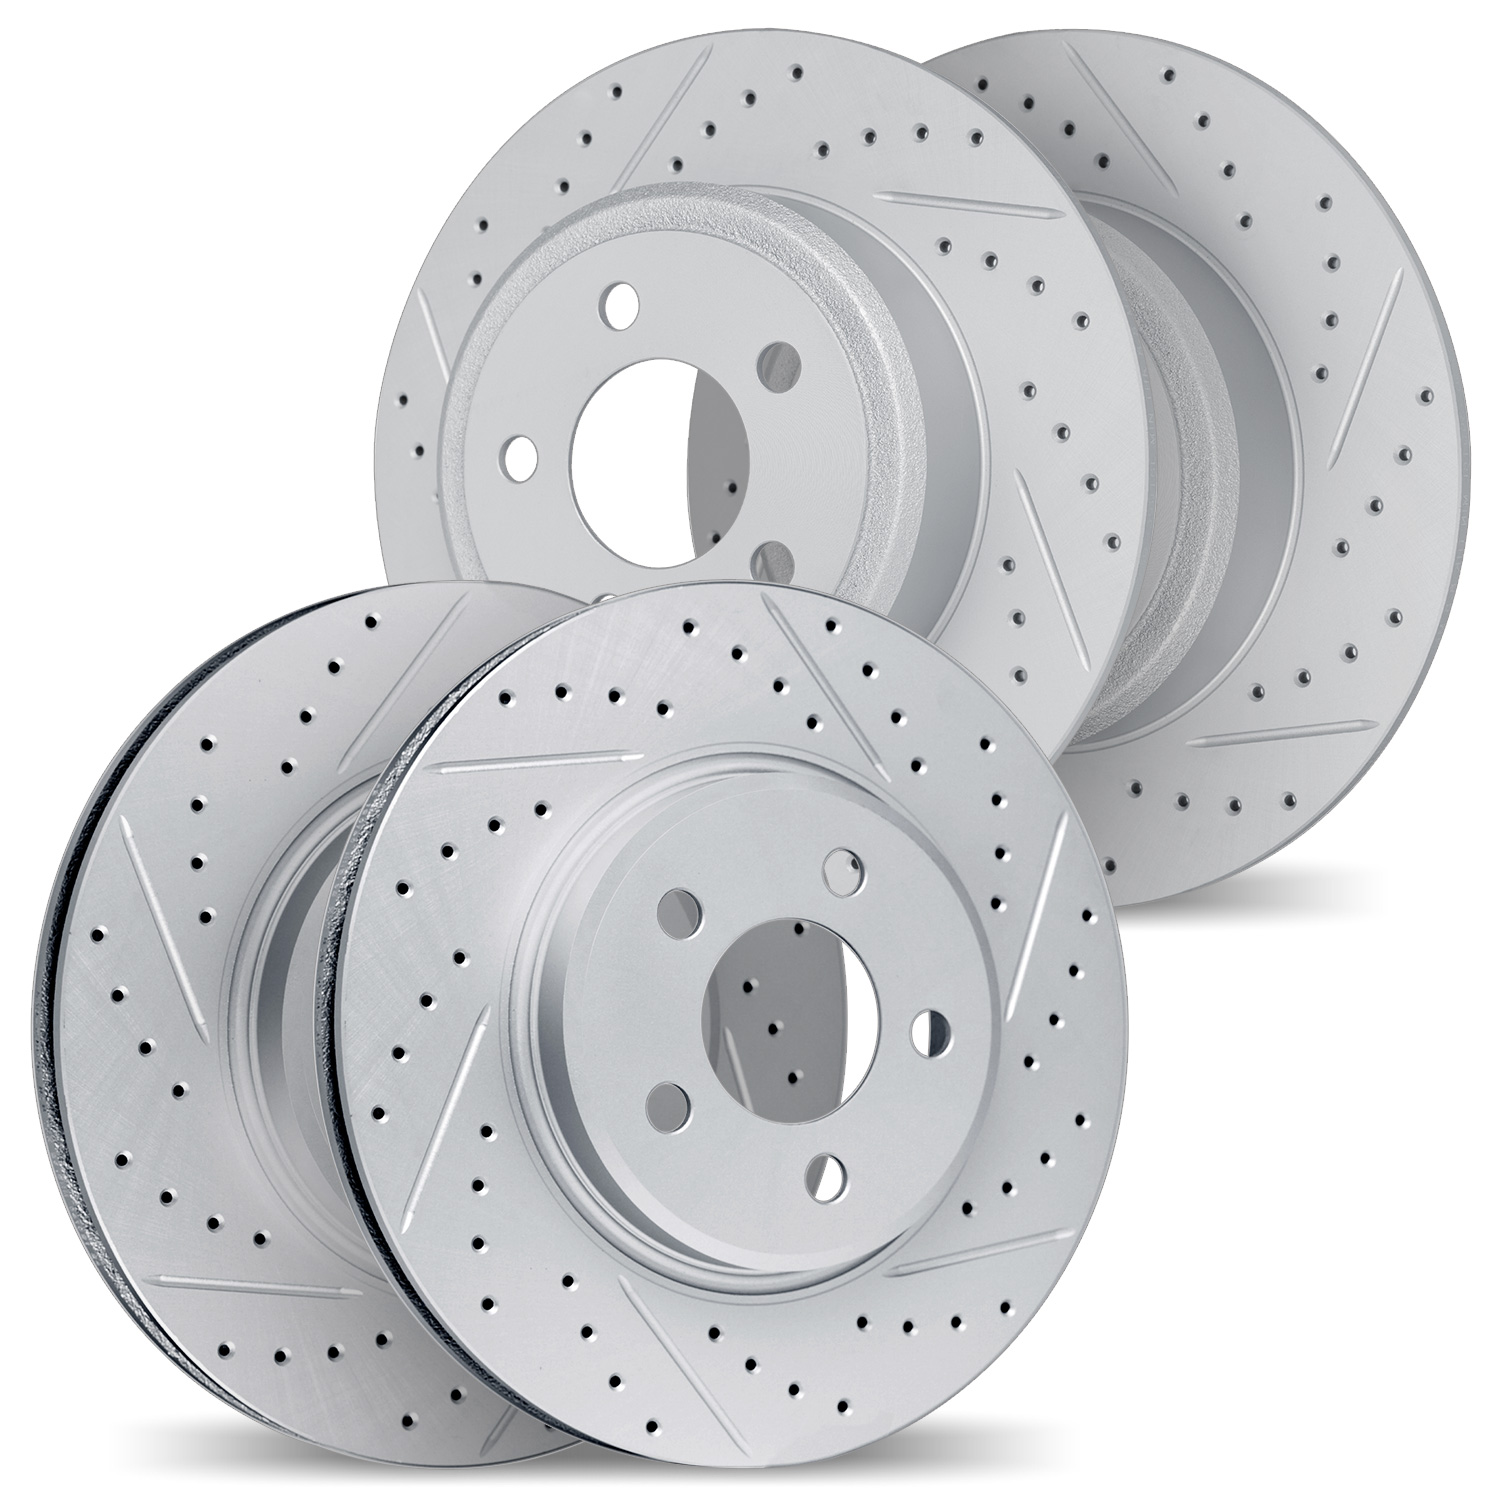 2004-39015 Geoperformance Drilled/Slotted Brake Rotors, 2003-2009 Mopar, Position: Front and Rear